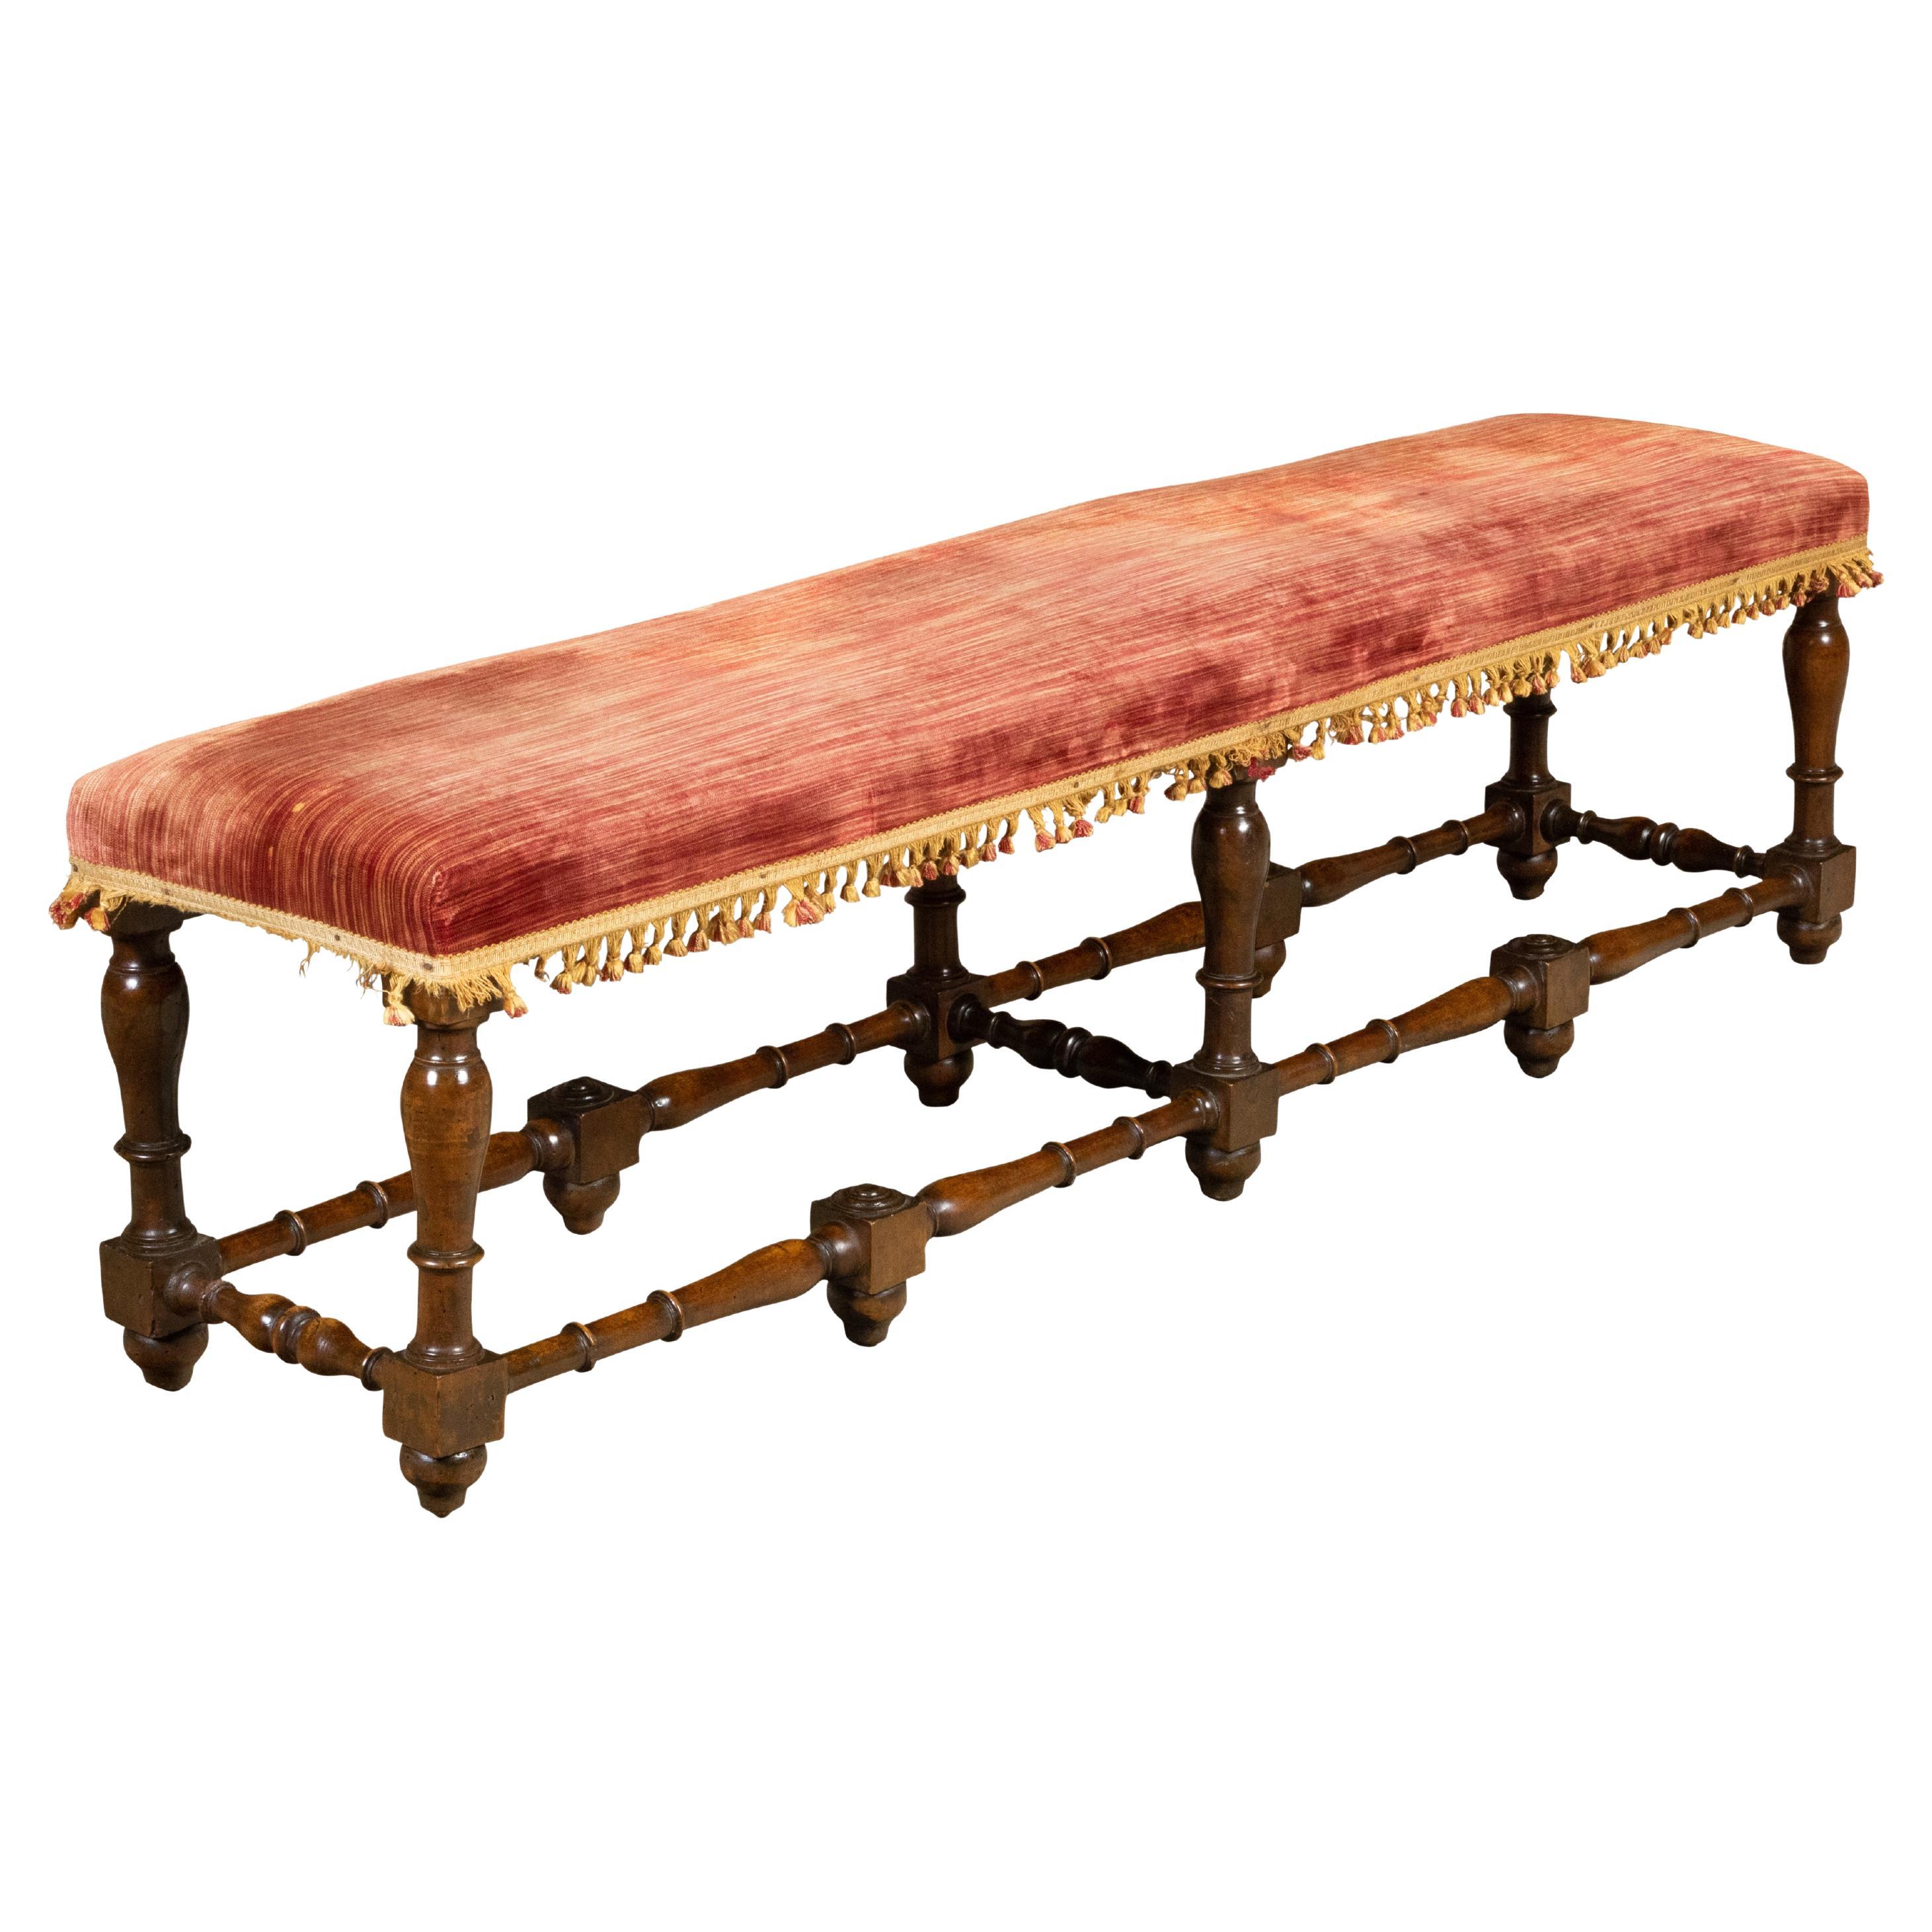 Italian 1820s Walnut Bench with Red Fabric, Turned Legs and Stretchers For Sale